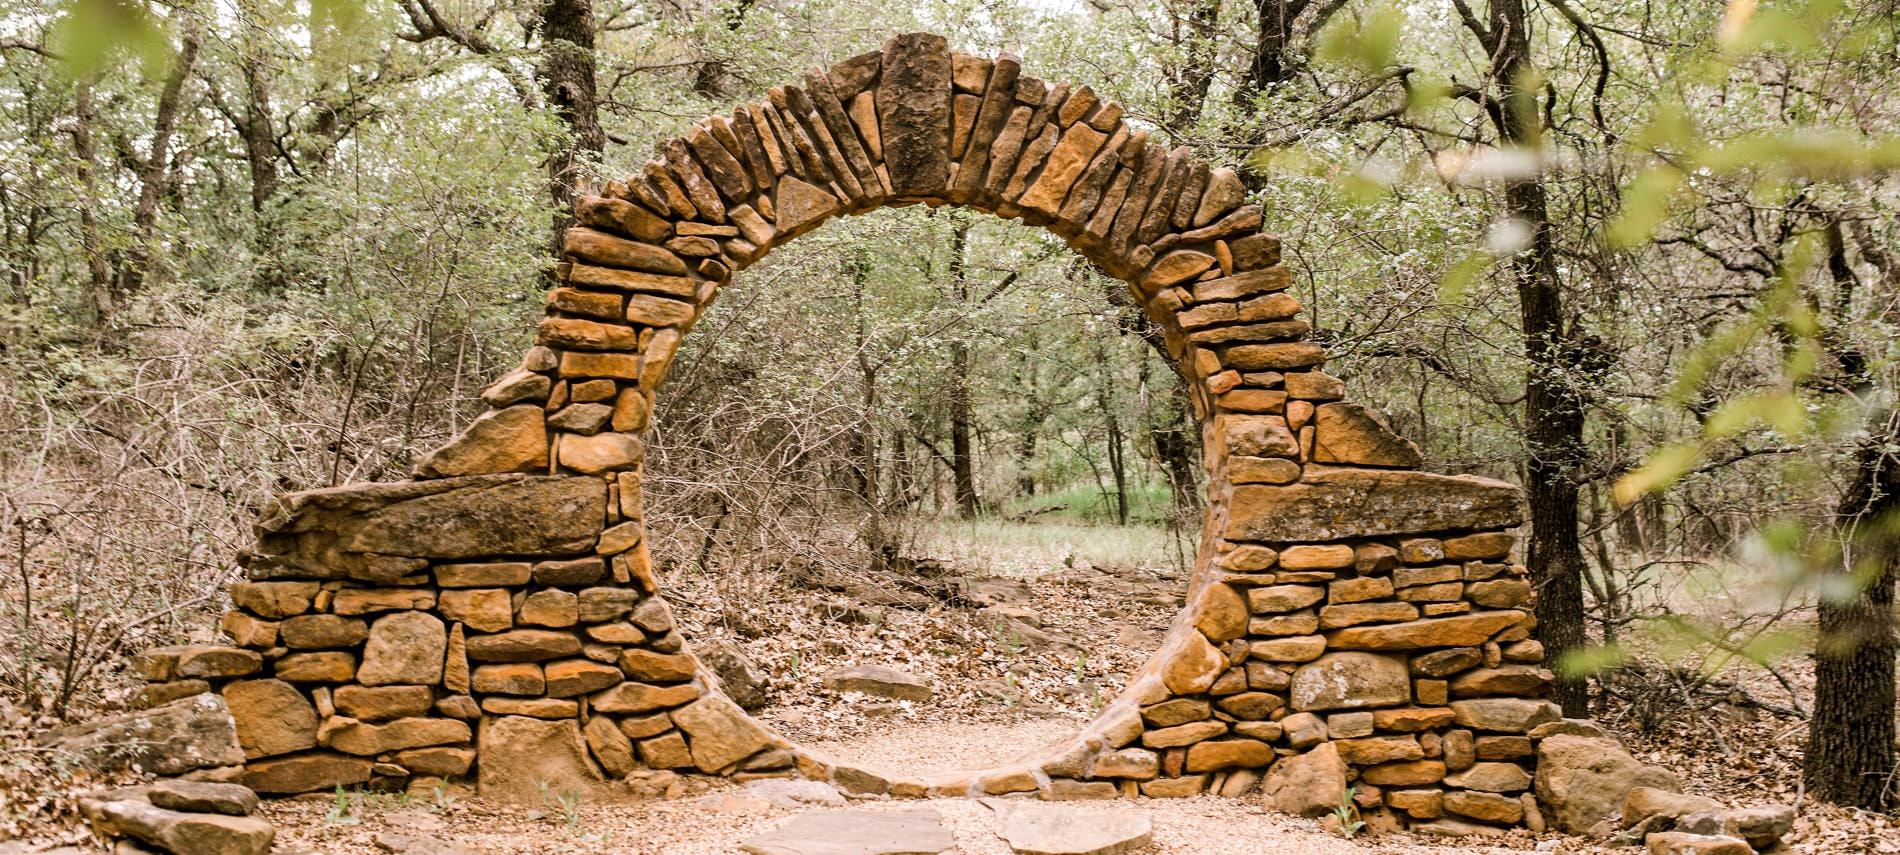 Handmade stone arch with base at the entrance of the woods